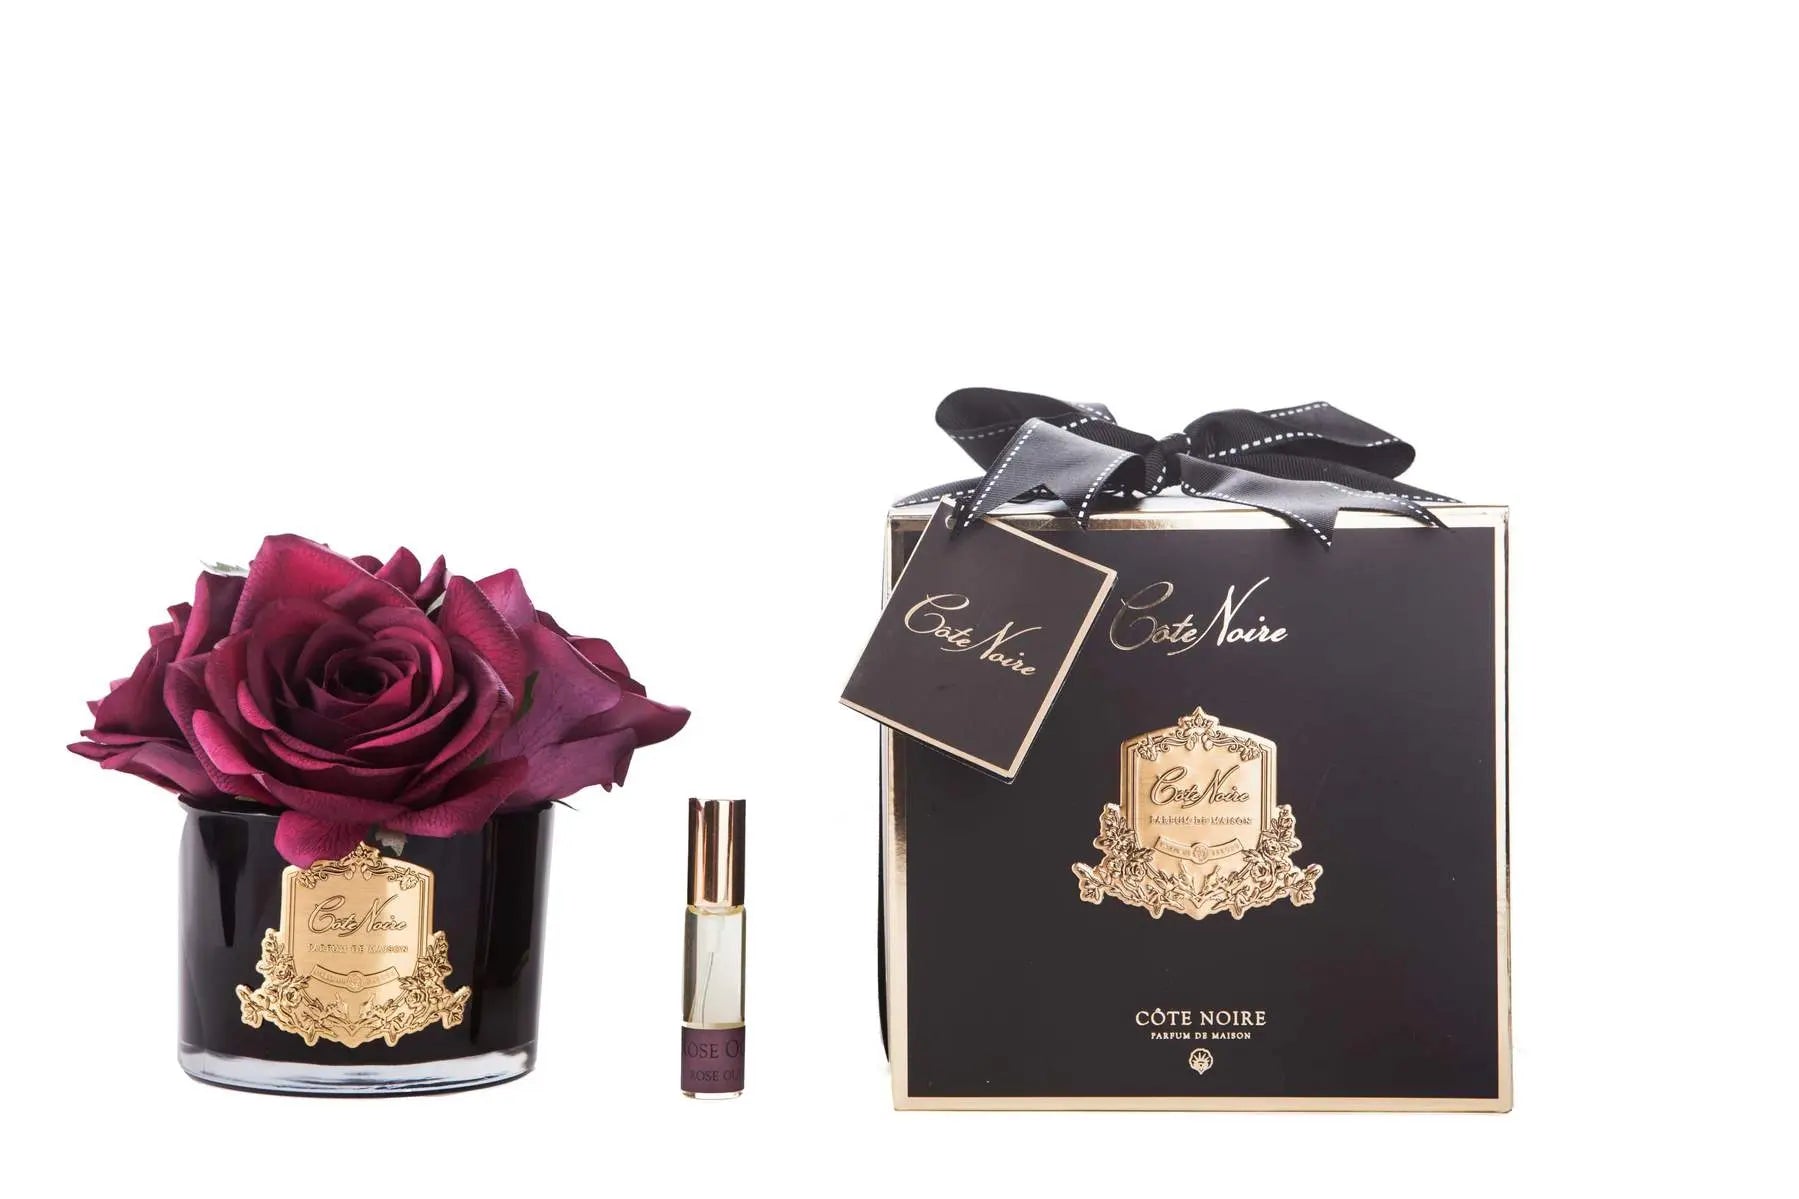 The image presents an elegant product arrangement against a white background. On the left, a black glass vase contains a single large deep red rose, beautifully detailed, with a gold label reading "Cote Noire Parfum de Maison." Beside the vase is a small, stylish perfume roller with a clear body and a gold cap, labeled similarly. On the right, a luxurious black gift box with a golden crest design is tied with a black ribbon and adorned with a gift tag reading "Cote Noire."